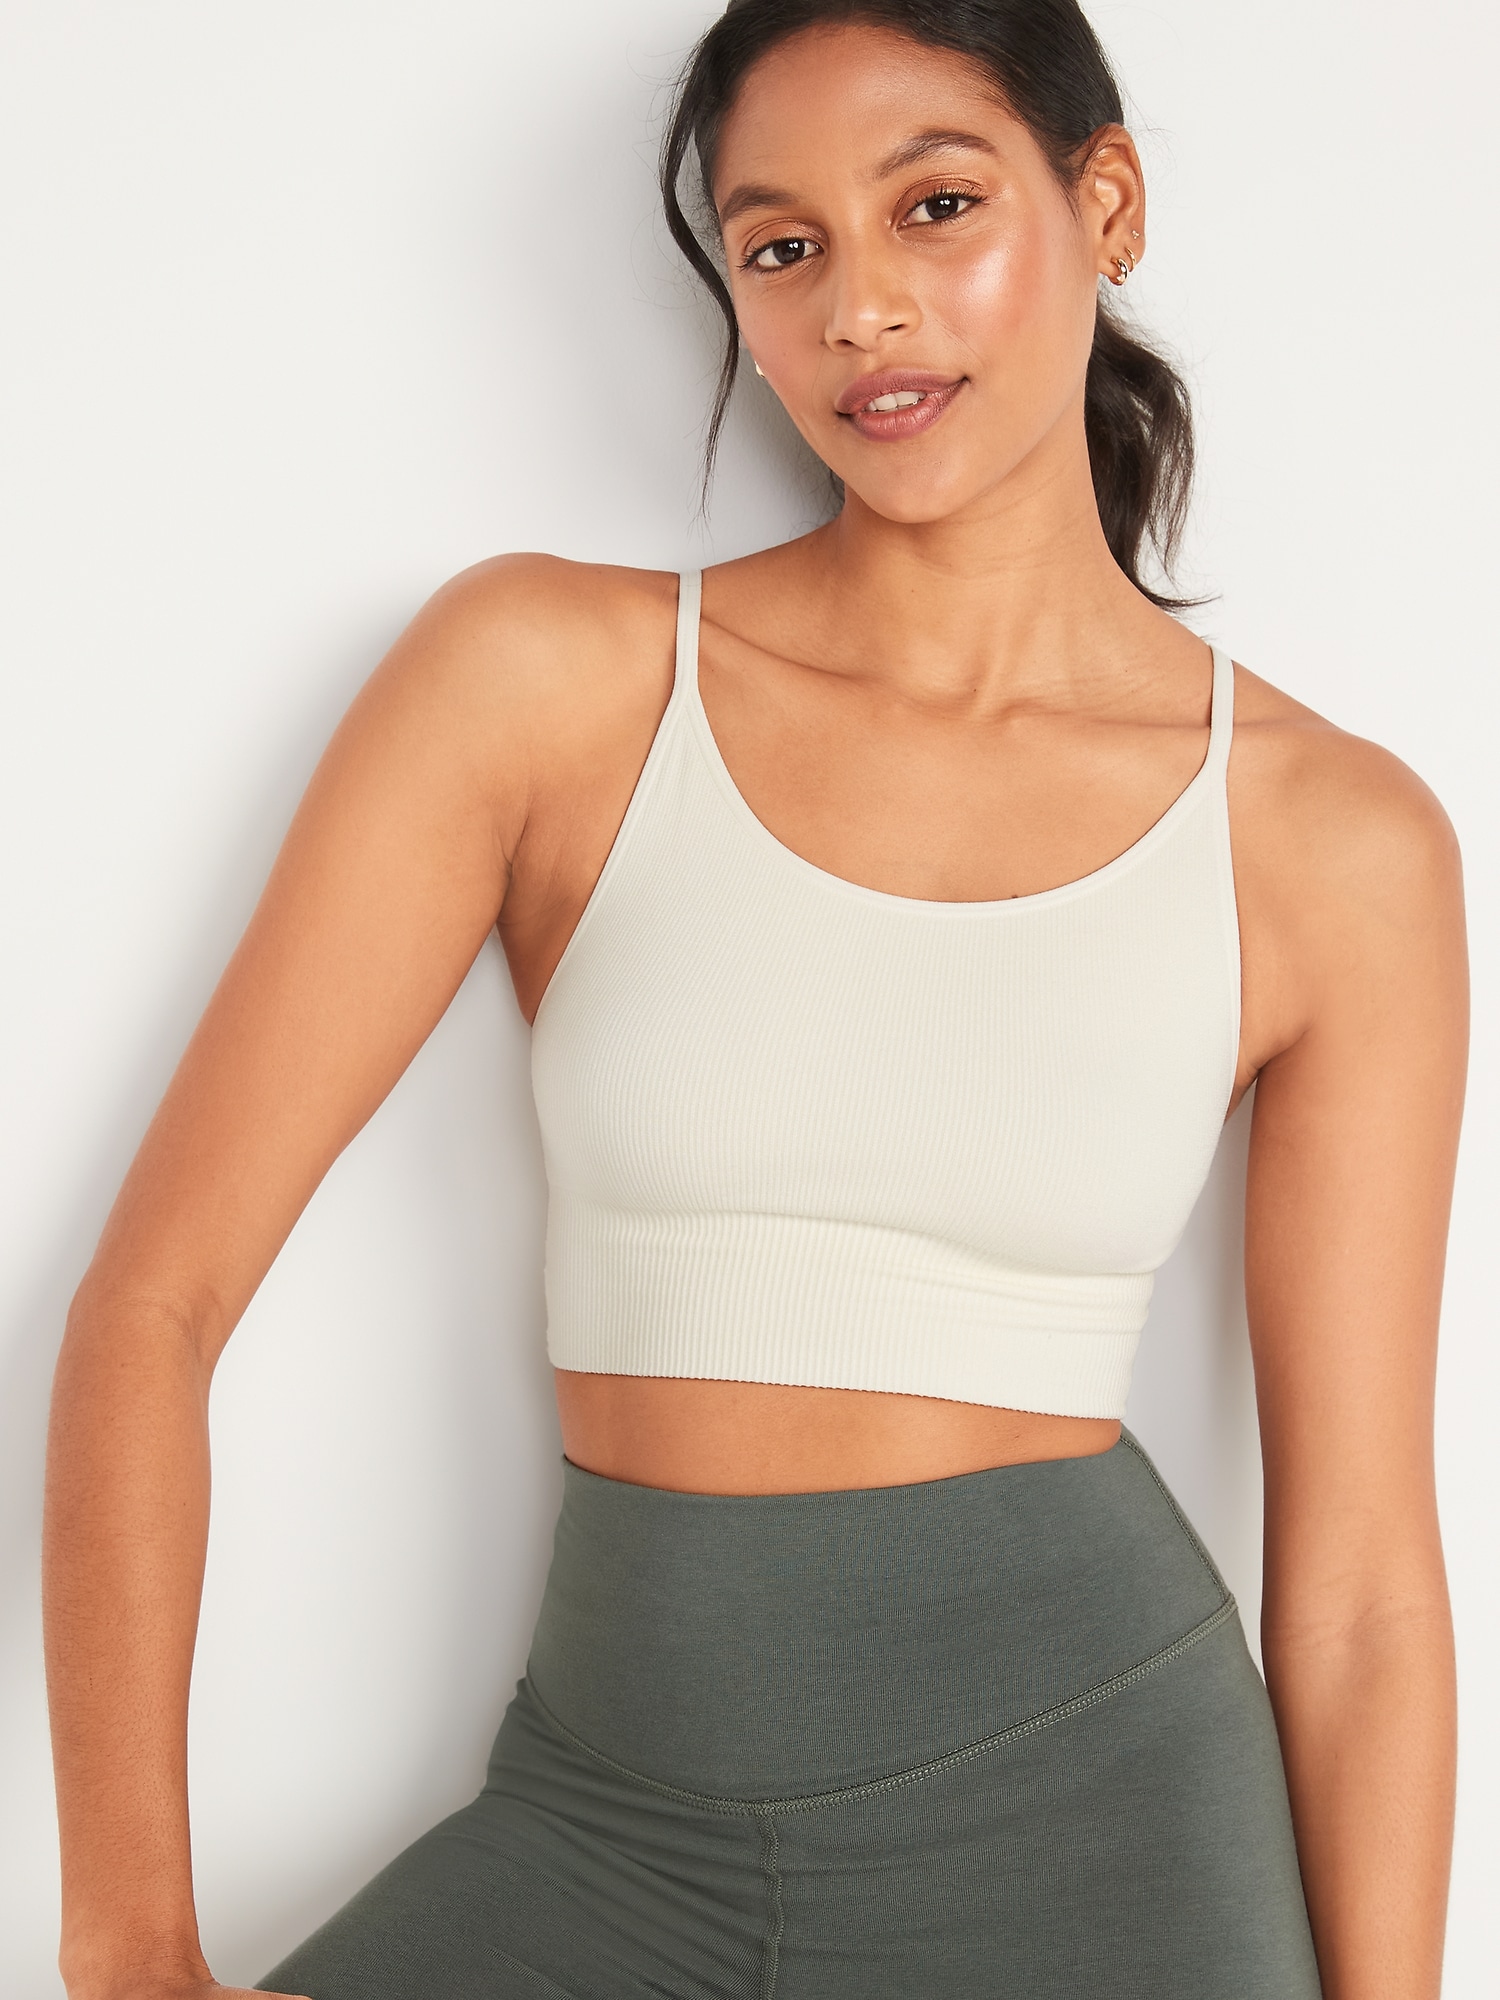 switch miracle ice rib knit bralette miracle so much mate